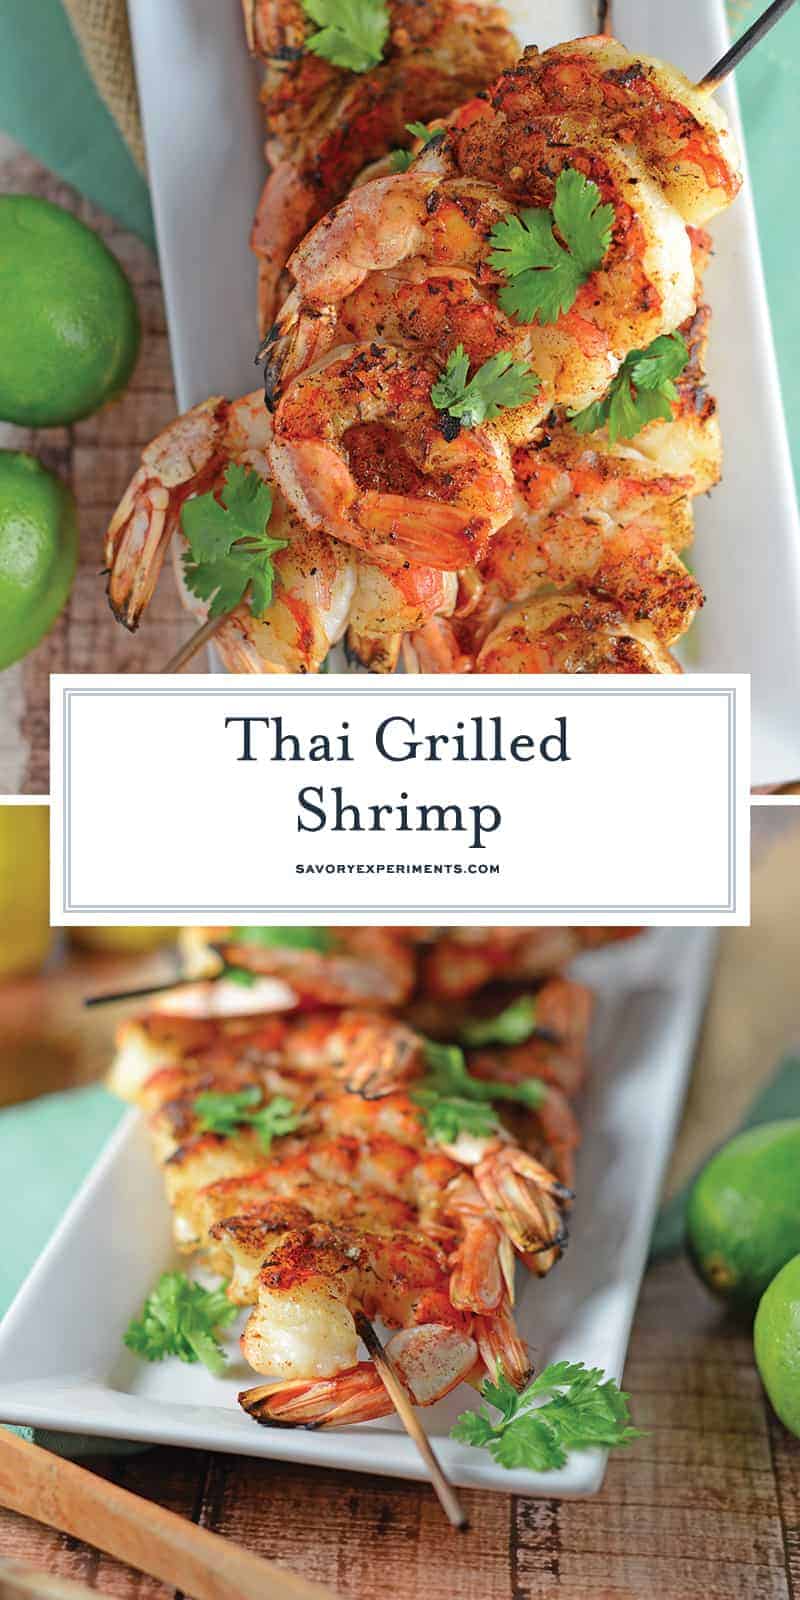 Thai Grilled Shrimp is an easy and healthy dinner idea, using light coconut milk, Thai seasoning and lime juice, it comes together in a snap! #grilledshrimpskewers #grilledshrimpkabobs www.savoryexperiments.com